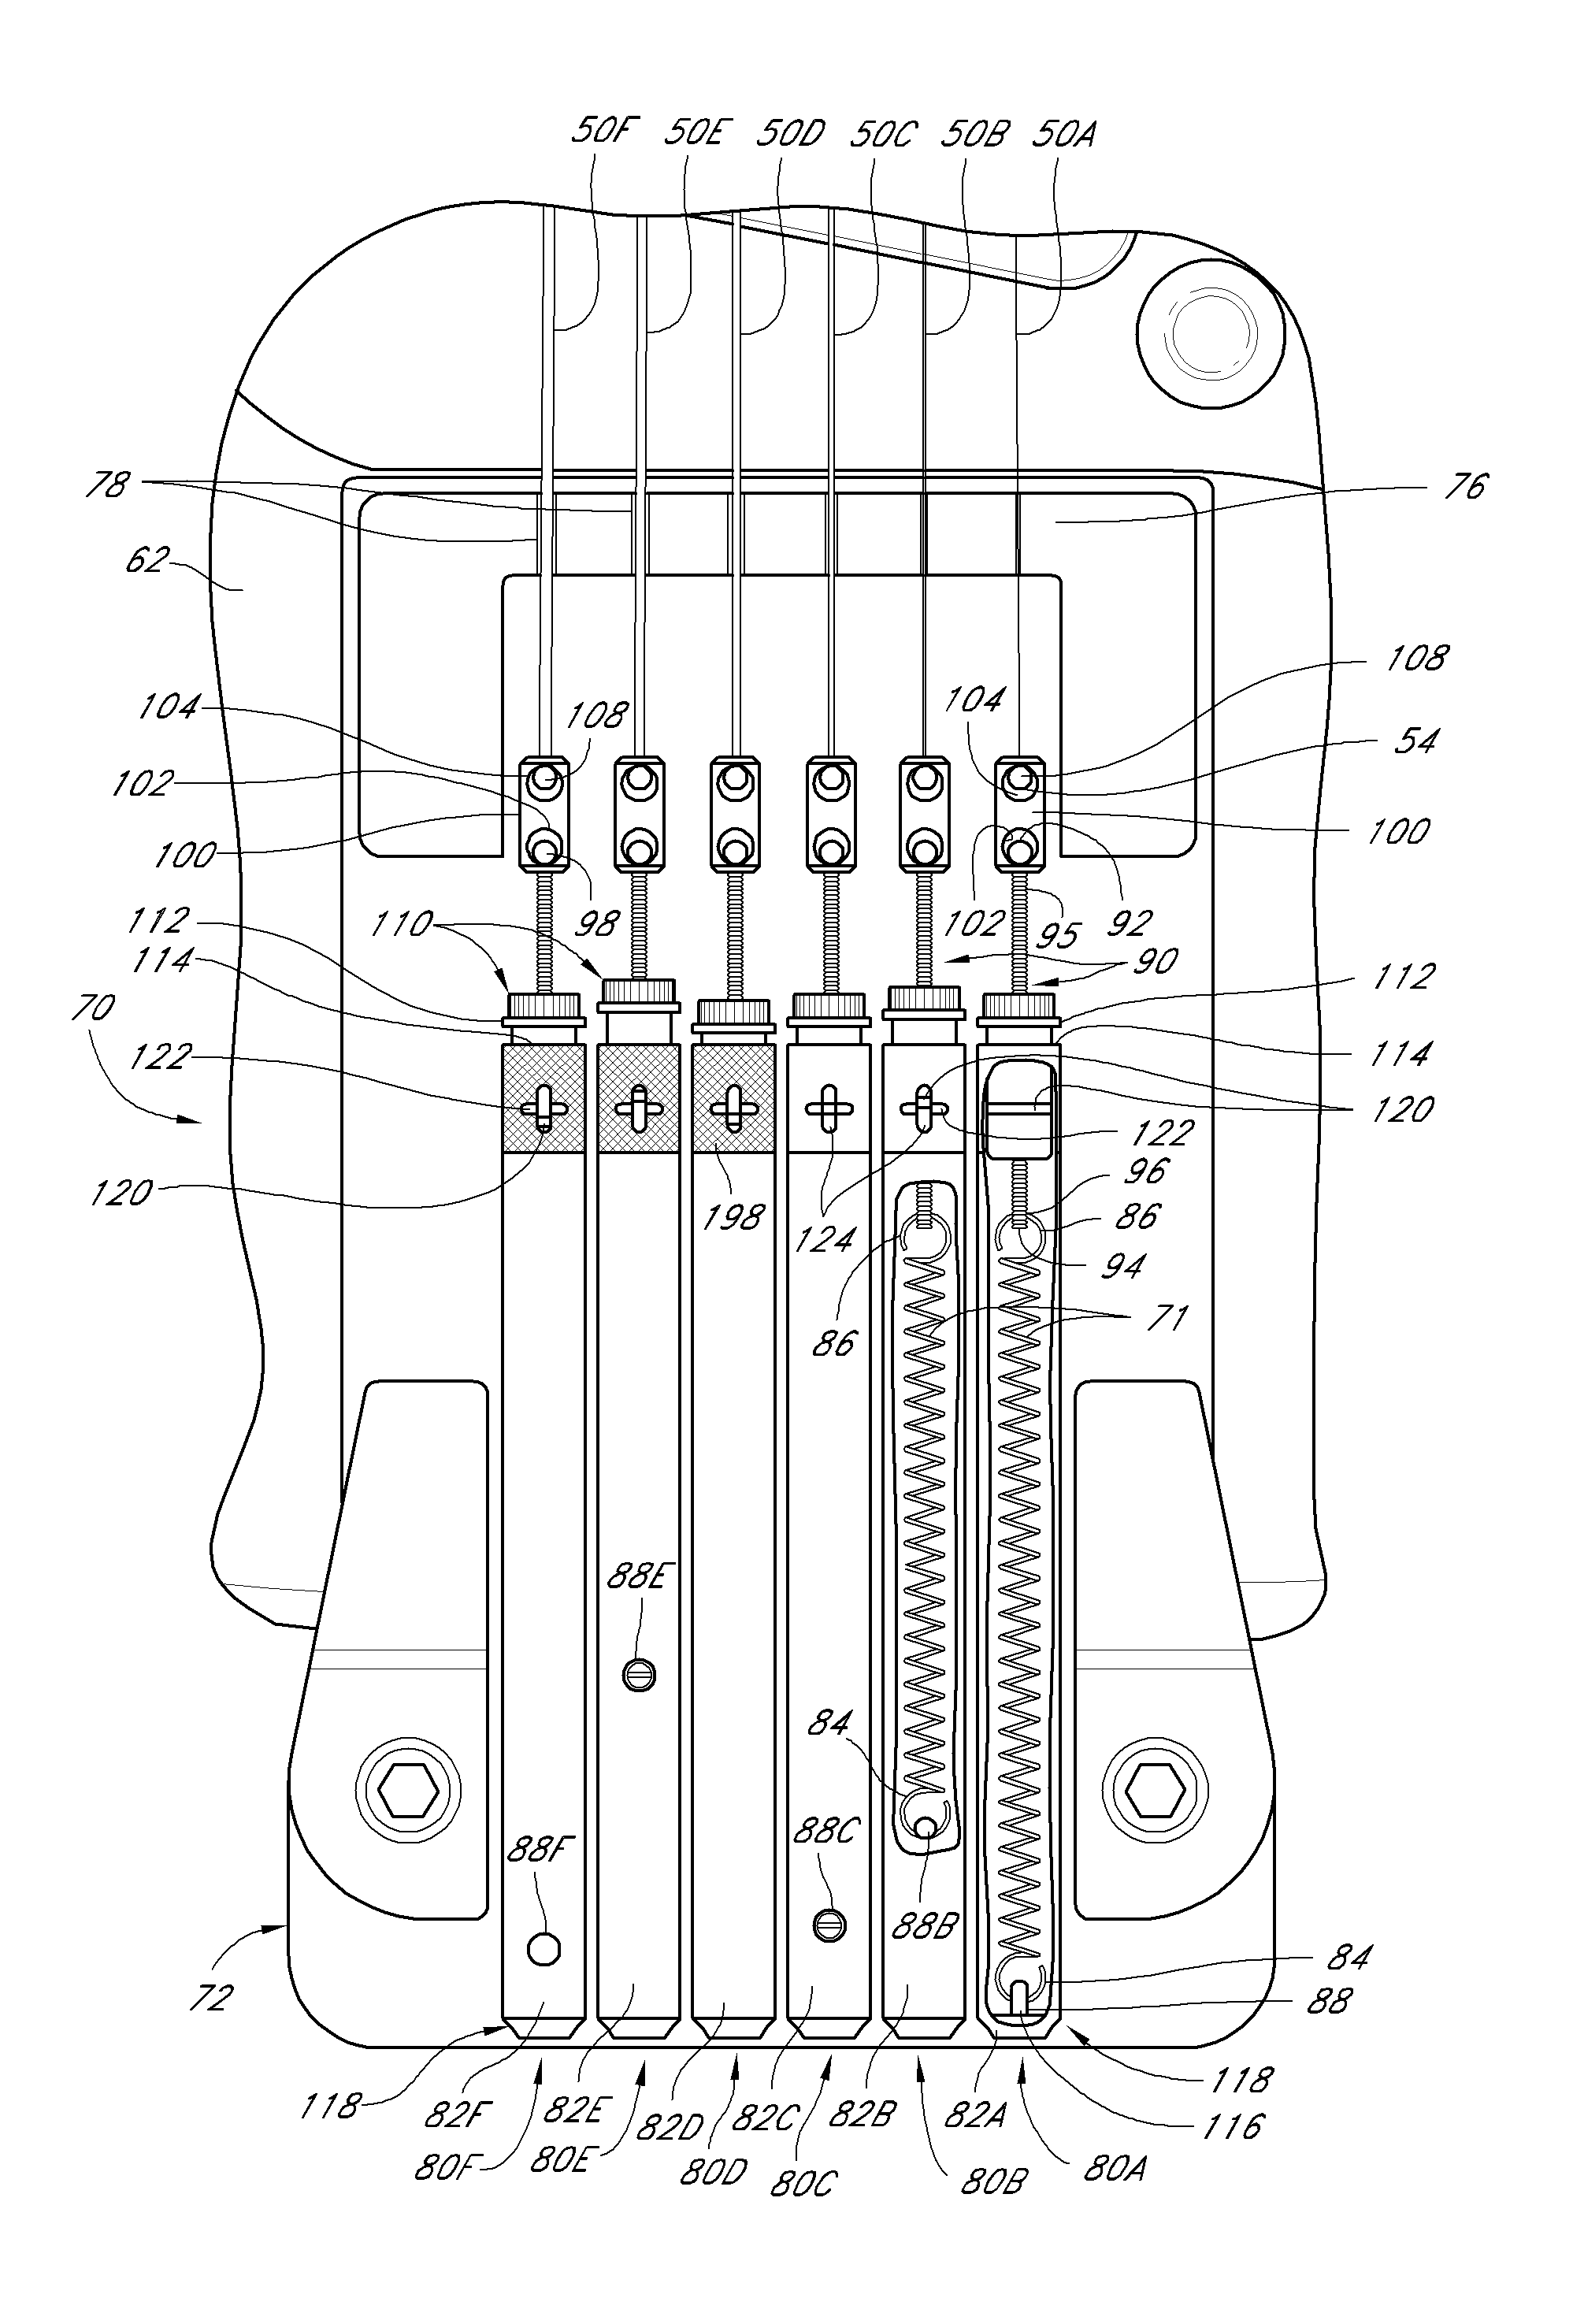 Stringed musical instrument using spring tension